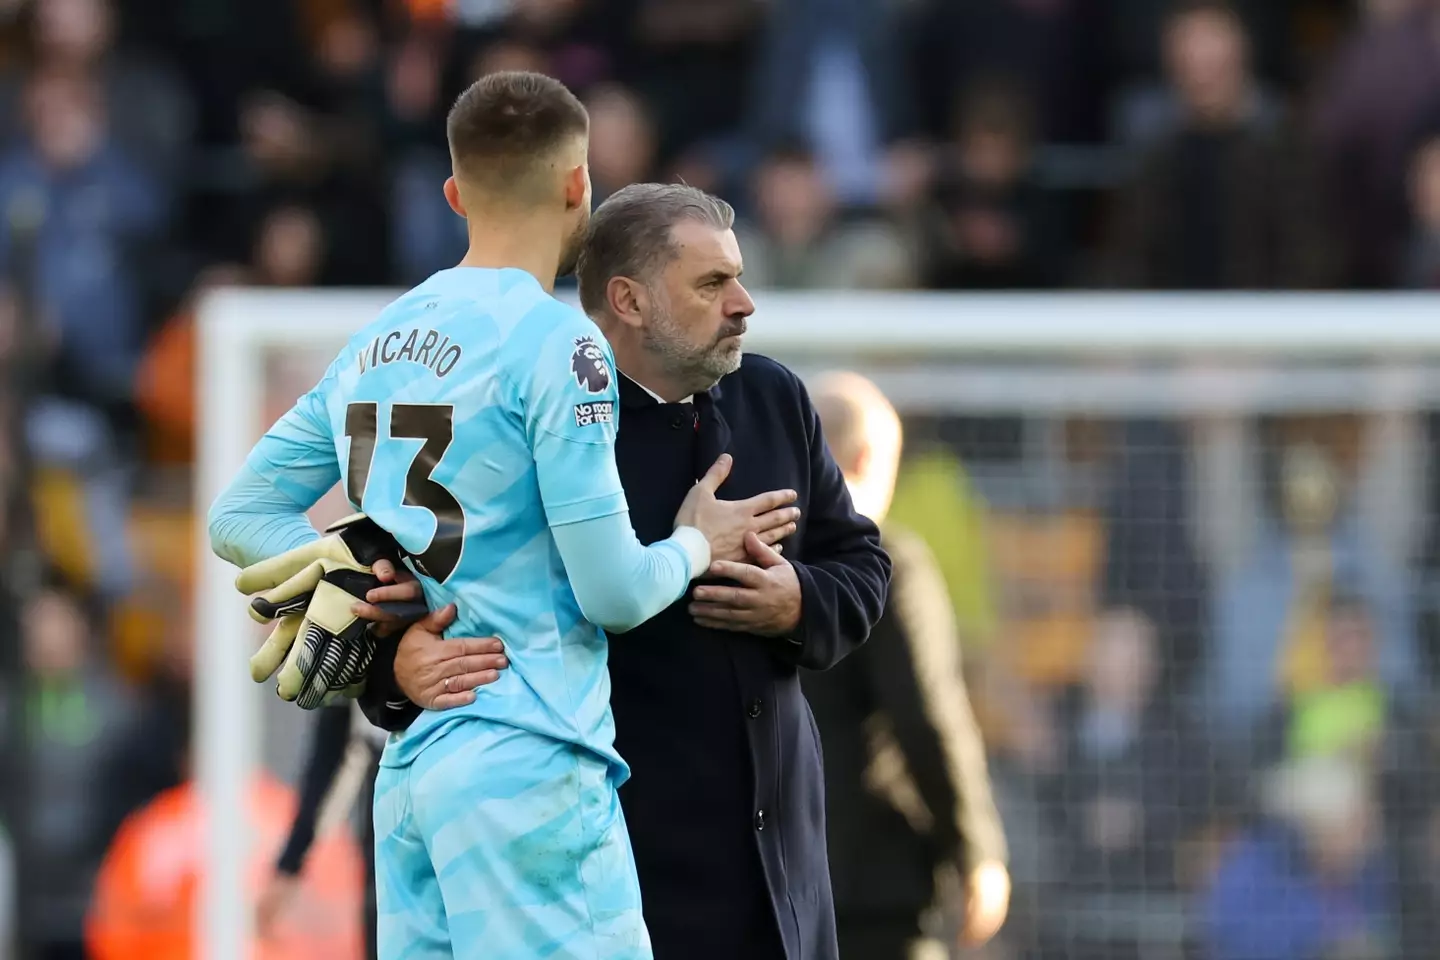 Postecoglou and Spurs goalkeeper Guglielmo Vicario after the defeat to Wolverhampton Wanderers. (Image